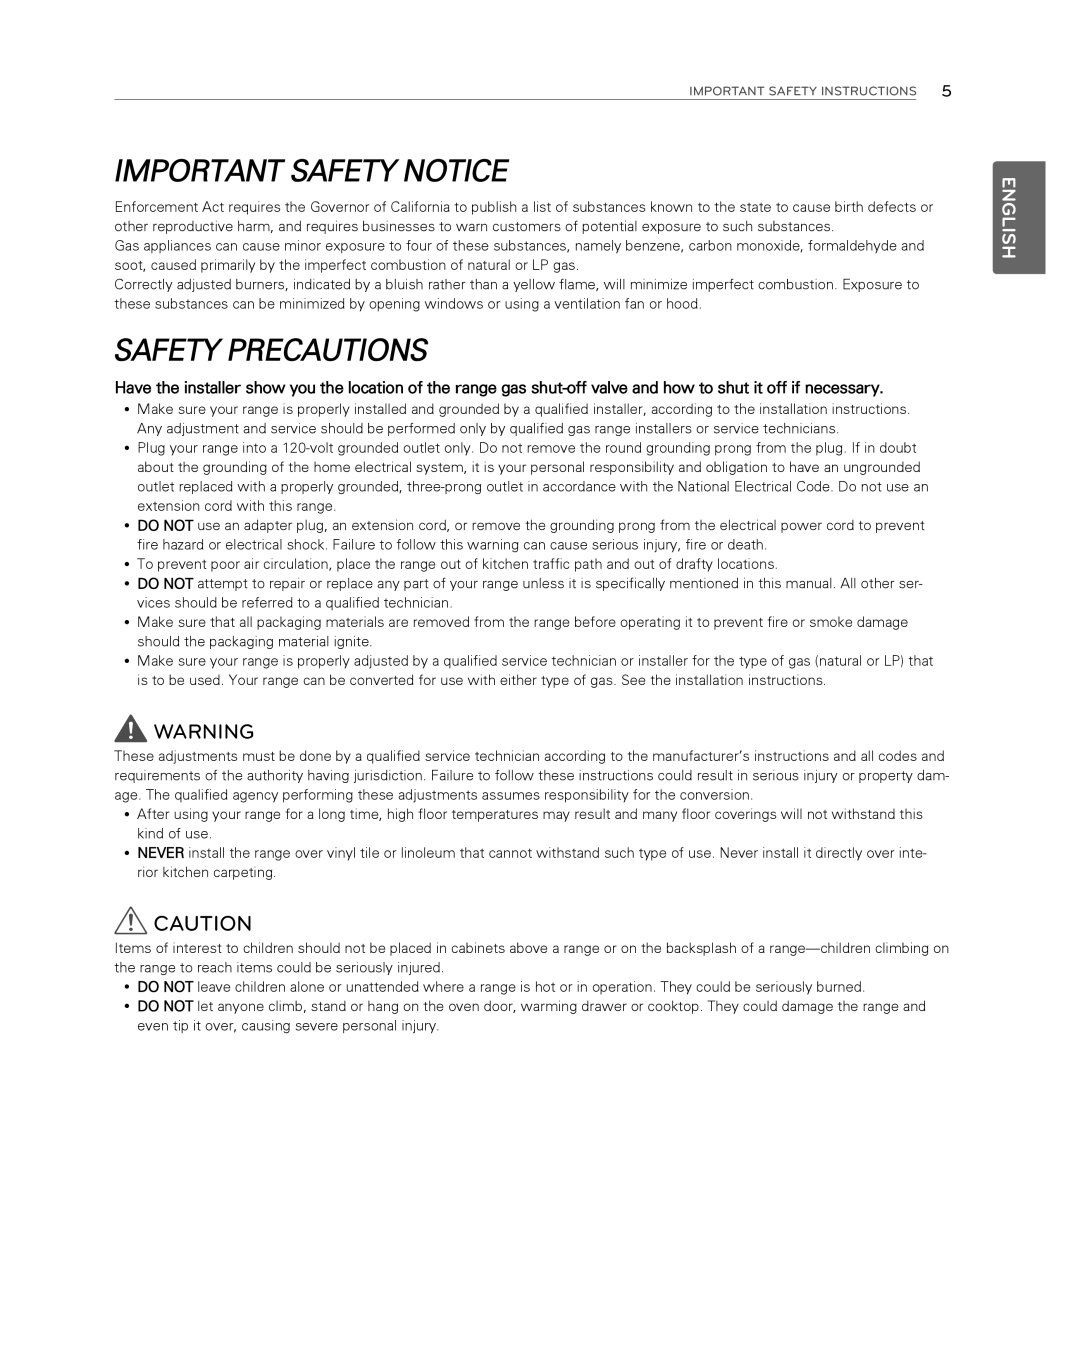 LG Electronics LDG3017ST owner manual Important Safety Notice, Safety Precautions, English, Important Safety Instructions 